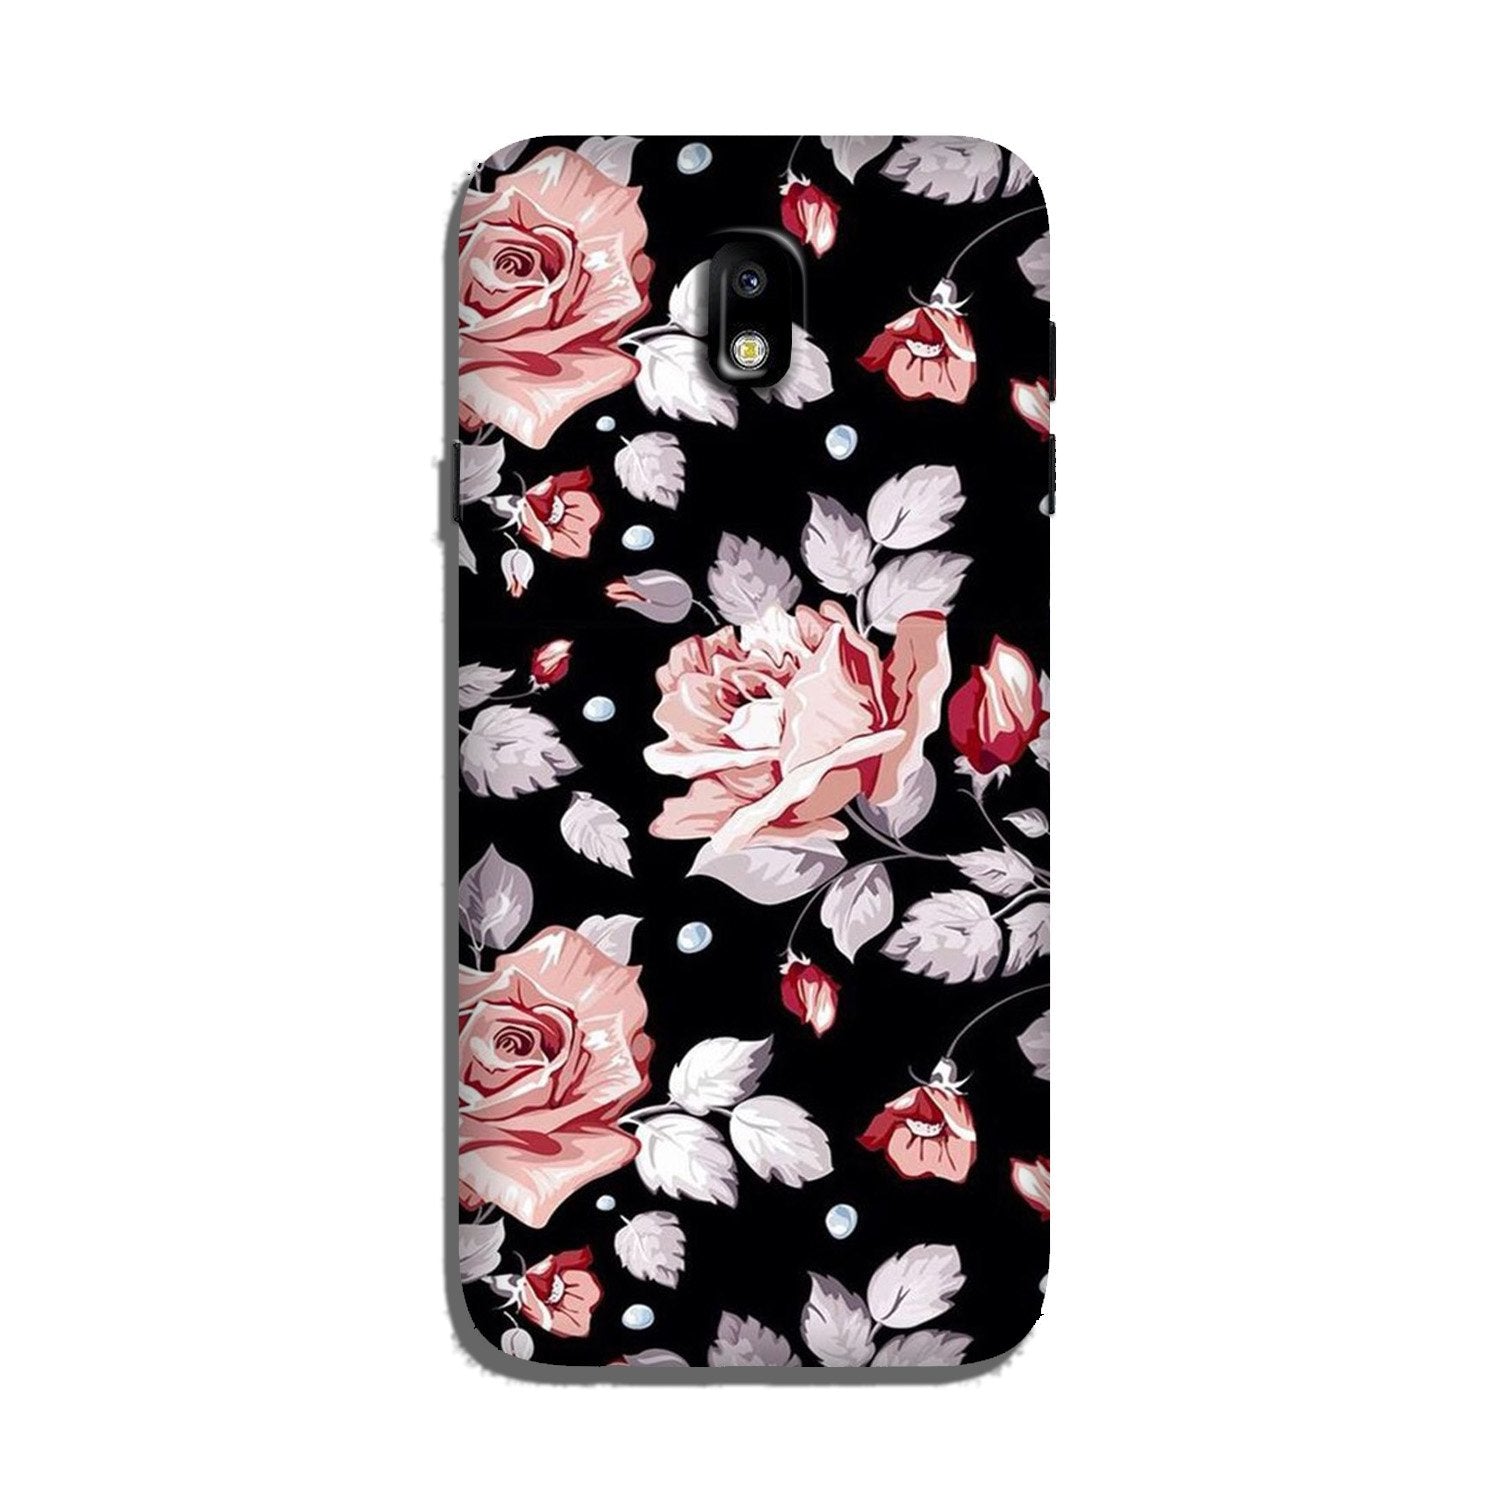 Pink rose Case for Galaxy J7 Pro